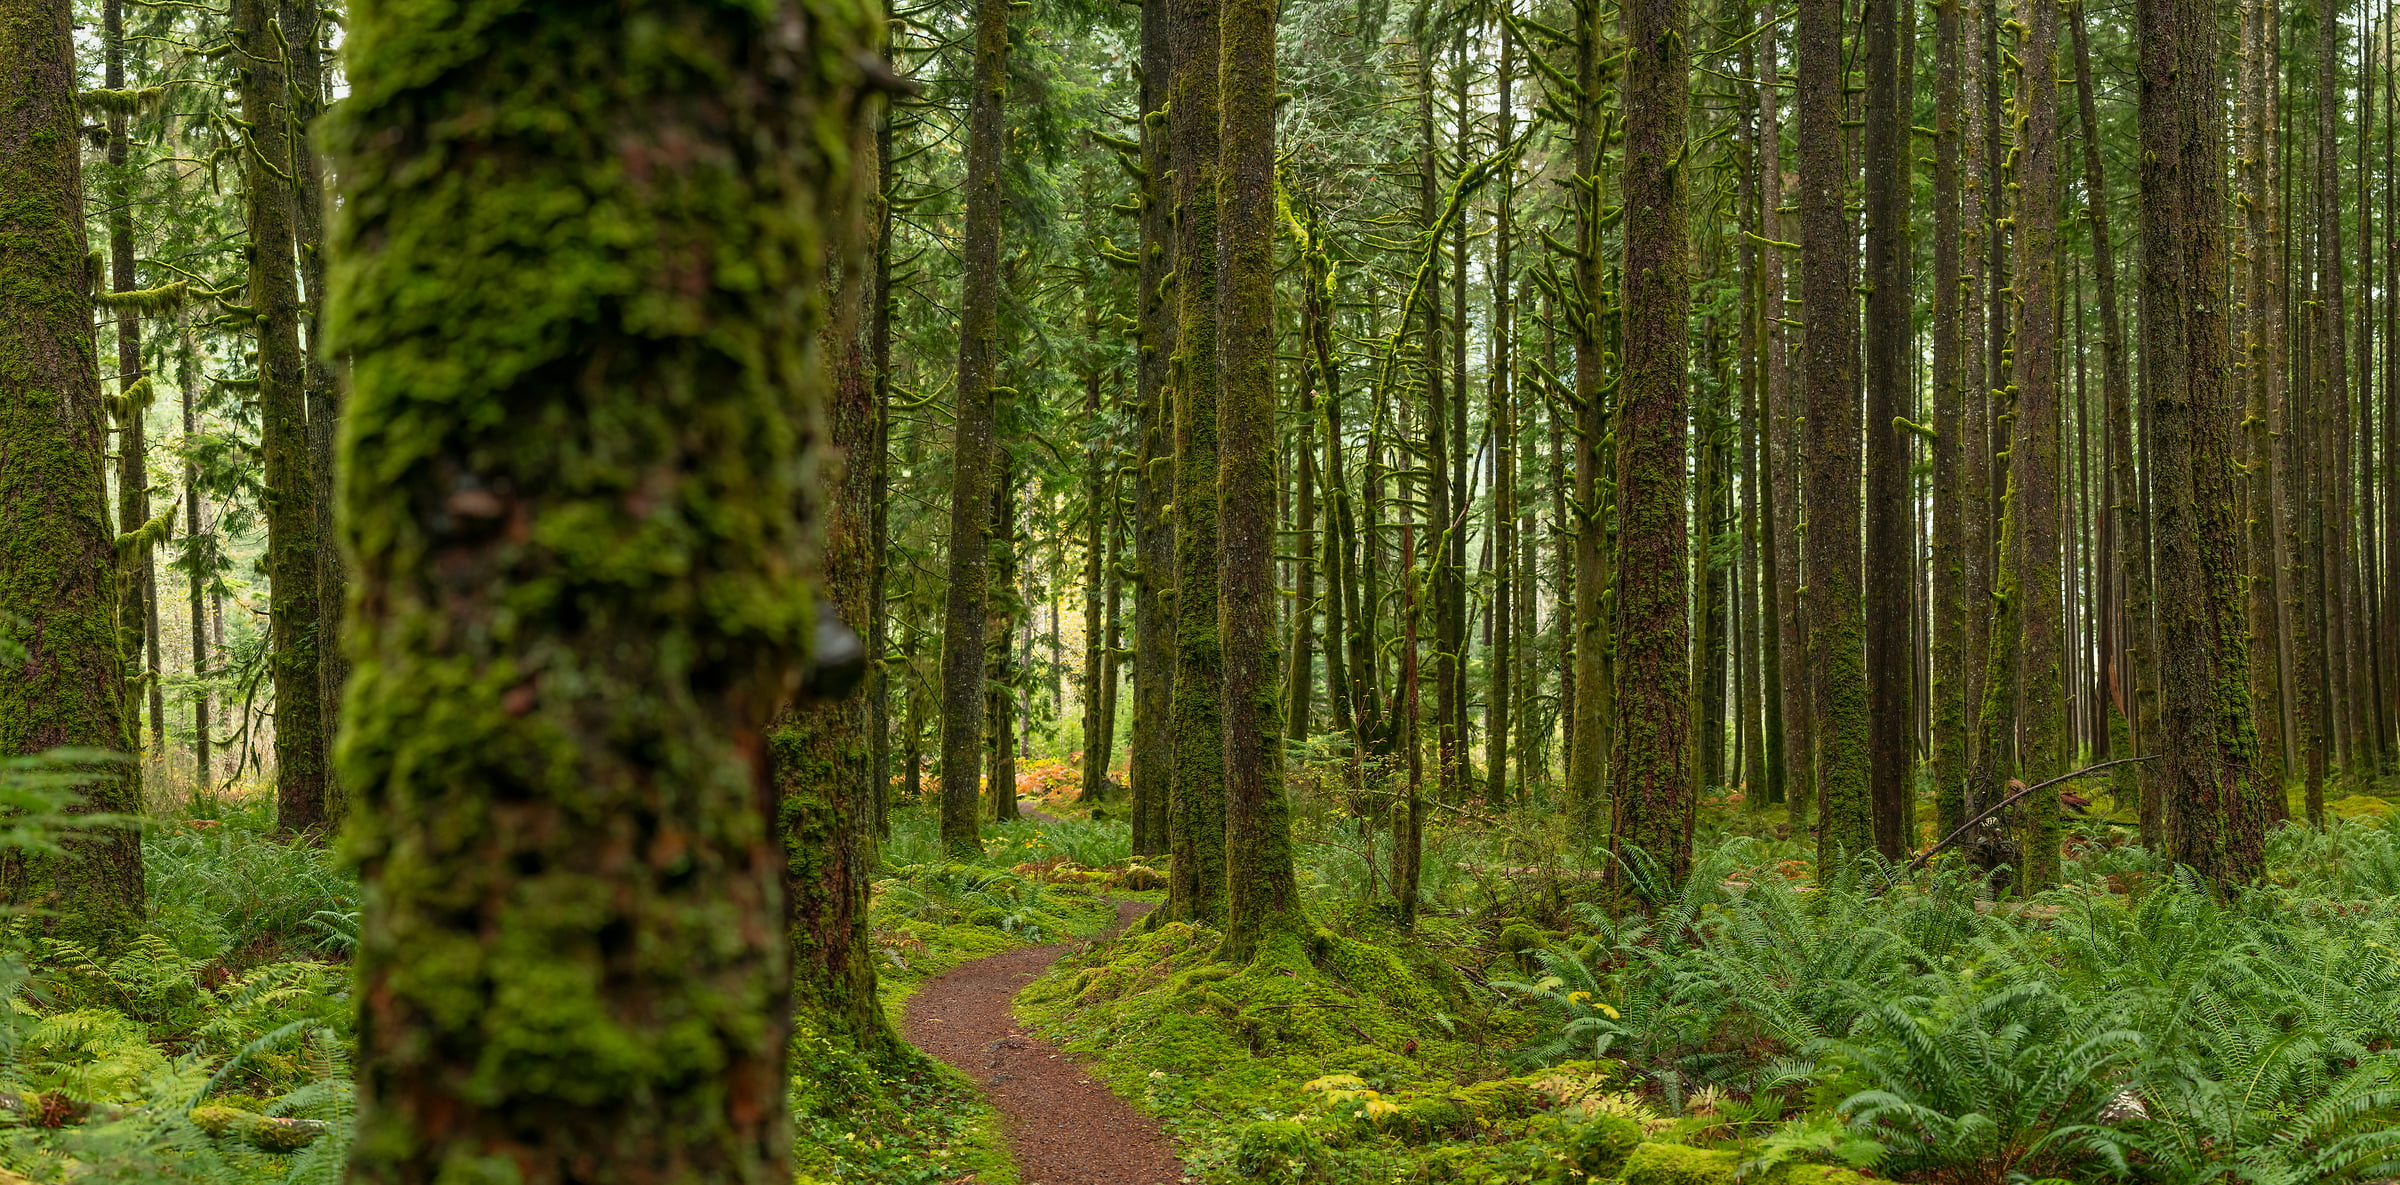 292 megapixels! A very high resolution, large-format VAST photo print of a winding pathway in a forest; nature photograph created by Scott Rinckenberger in CCC Trail, Middle Fork Trailhead, Middle Fork of the Snoqualmie River, Washington